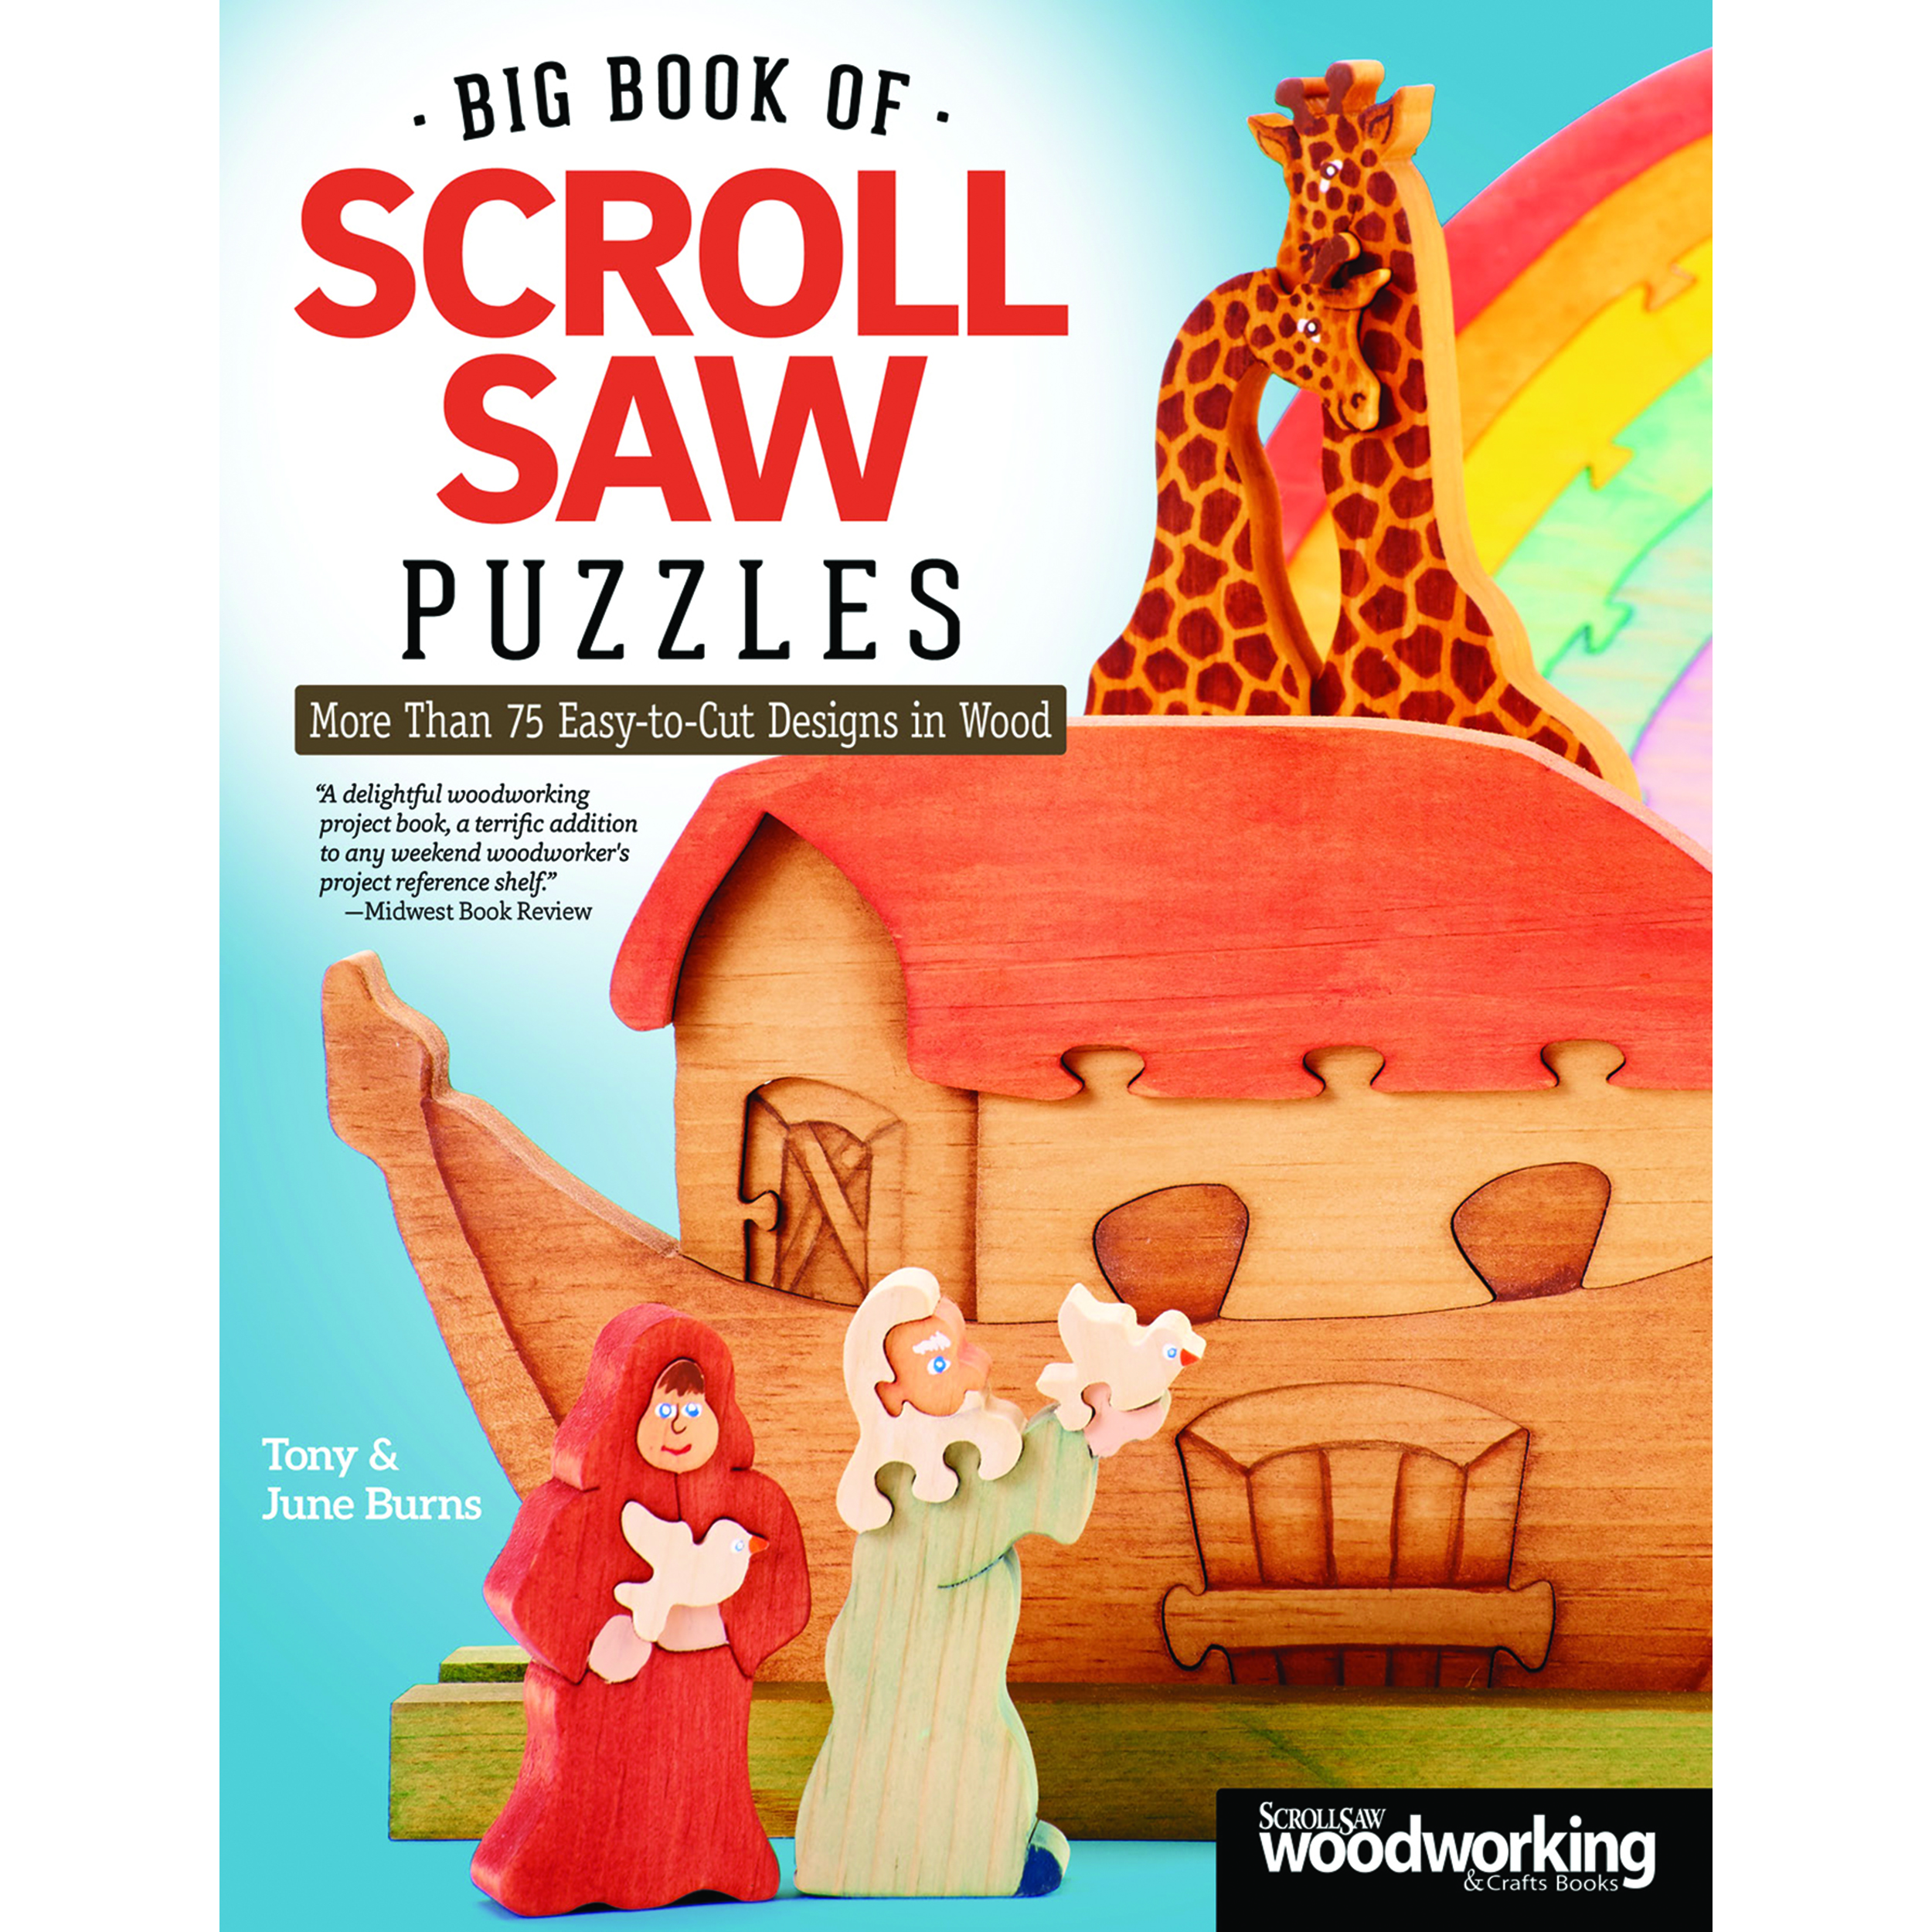 Big Book Of Scroll Saw Puzzles